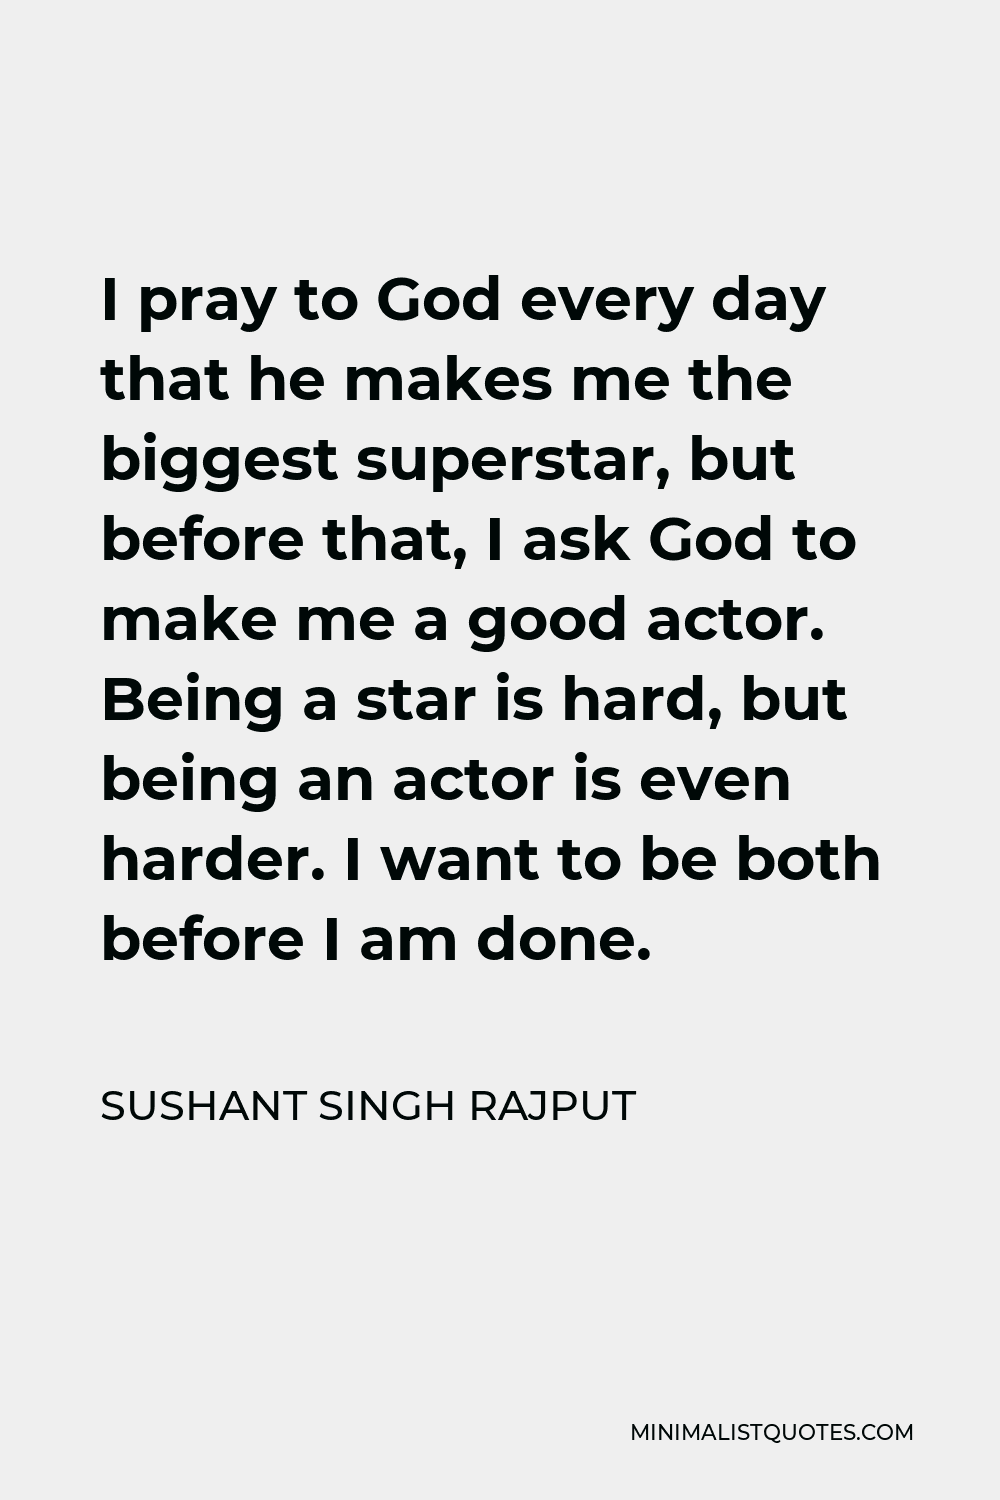 Sushant Singh Rajput Quote - I pray to God every day that he makes me the biggest superstar, but before that, I ask God to make me a good actor. Being a star is hard, but being an actor is even harder. I want to be both before I am done.